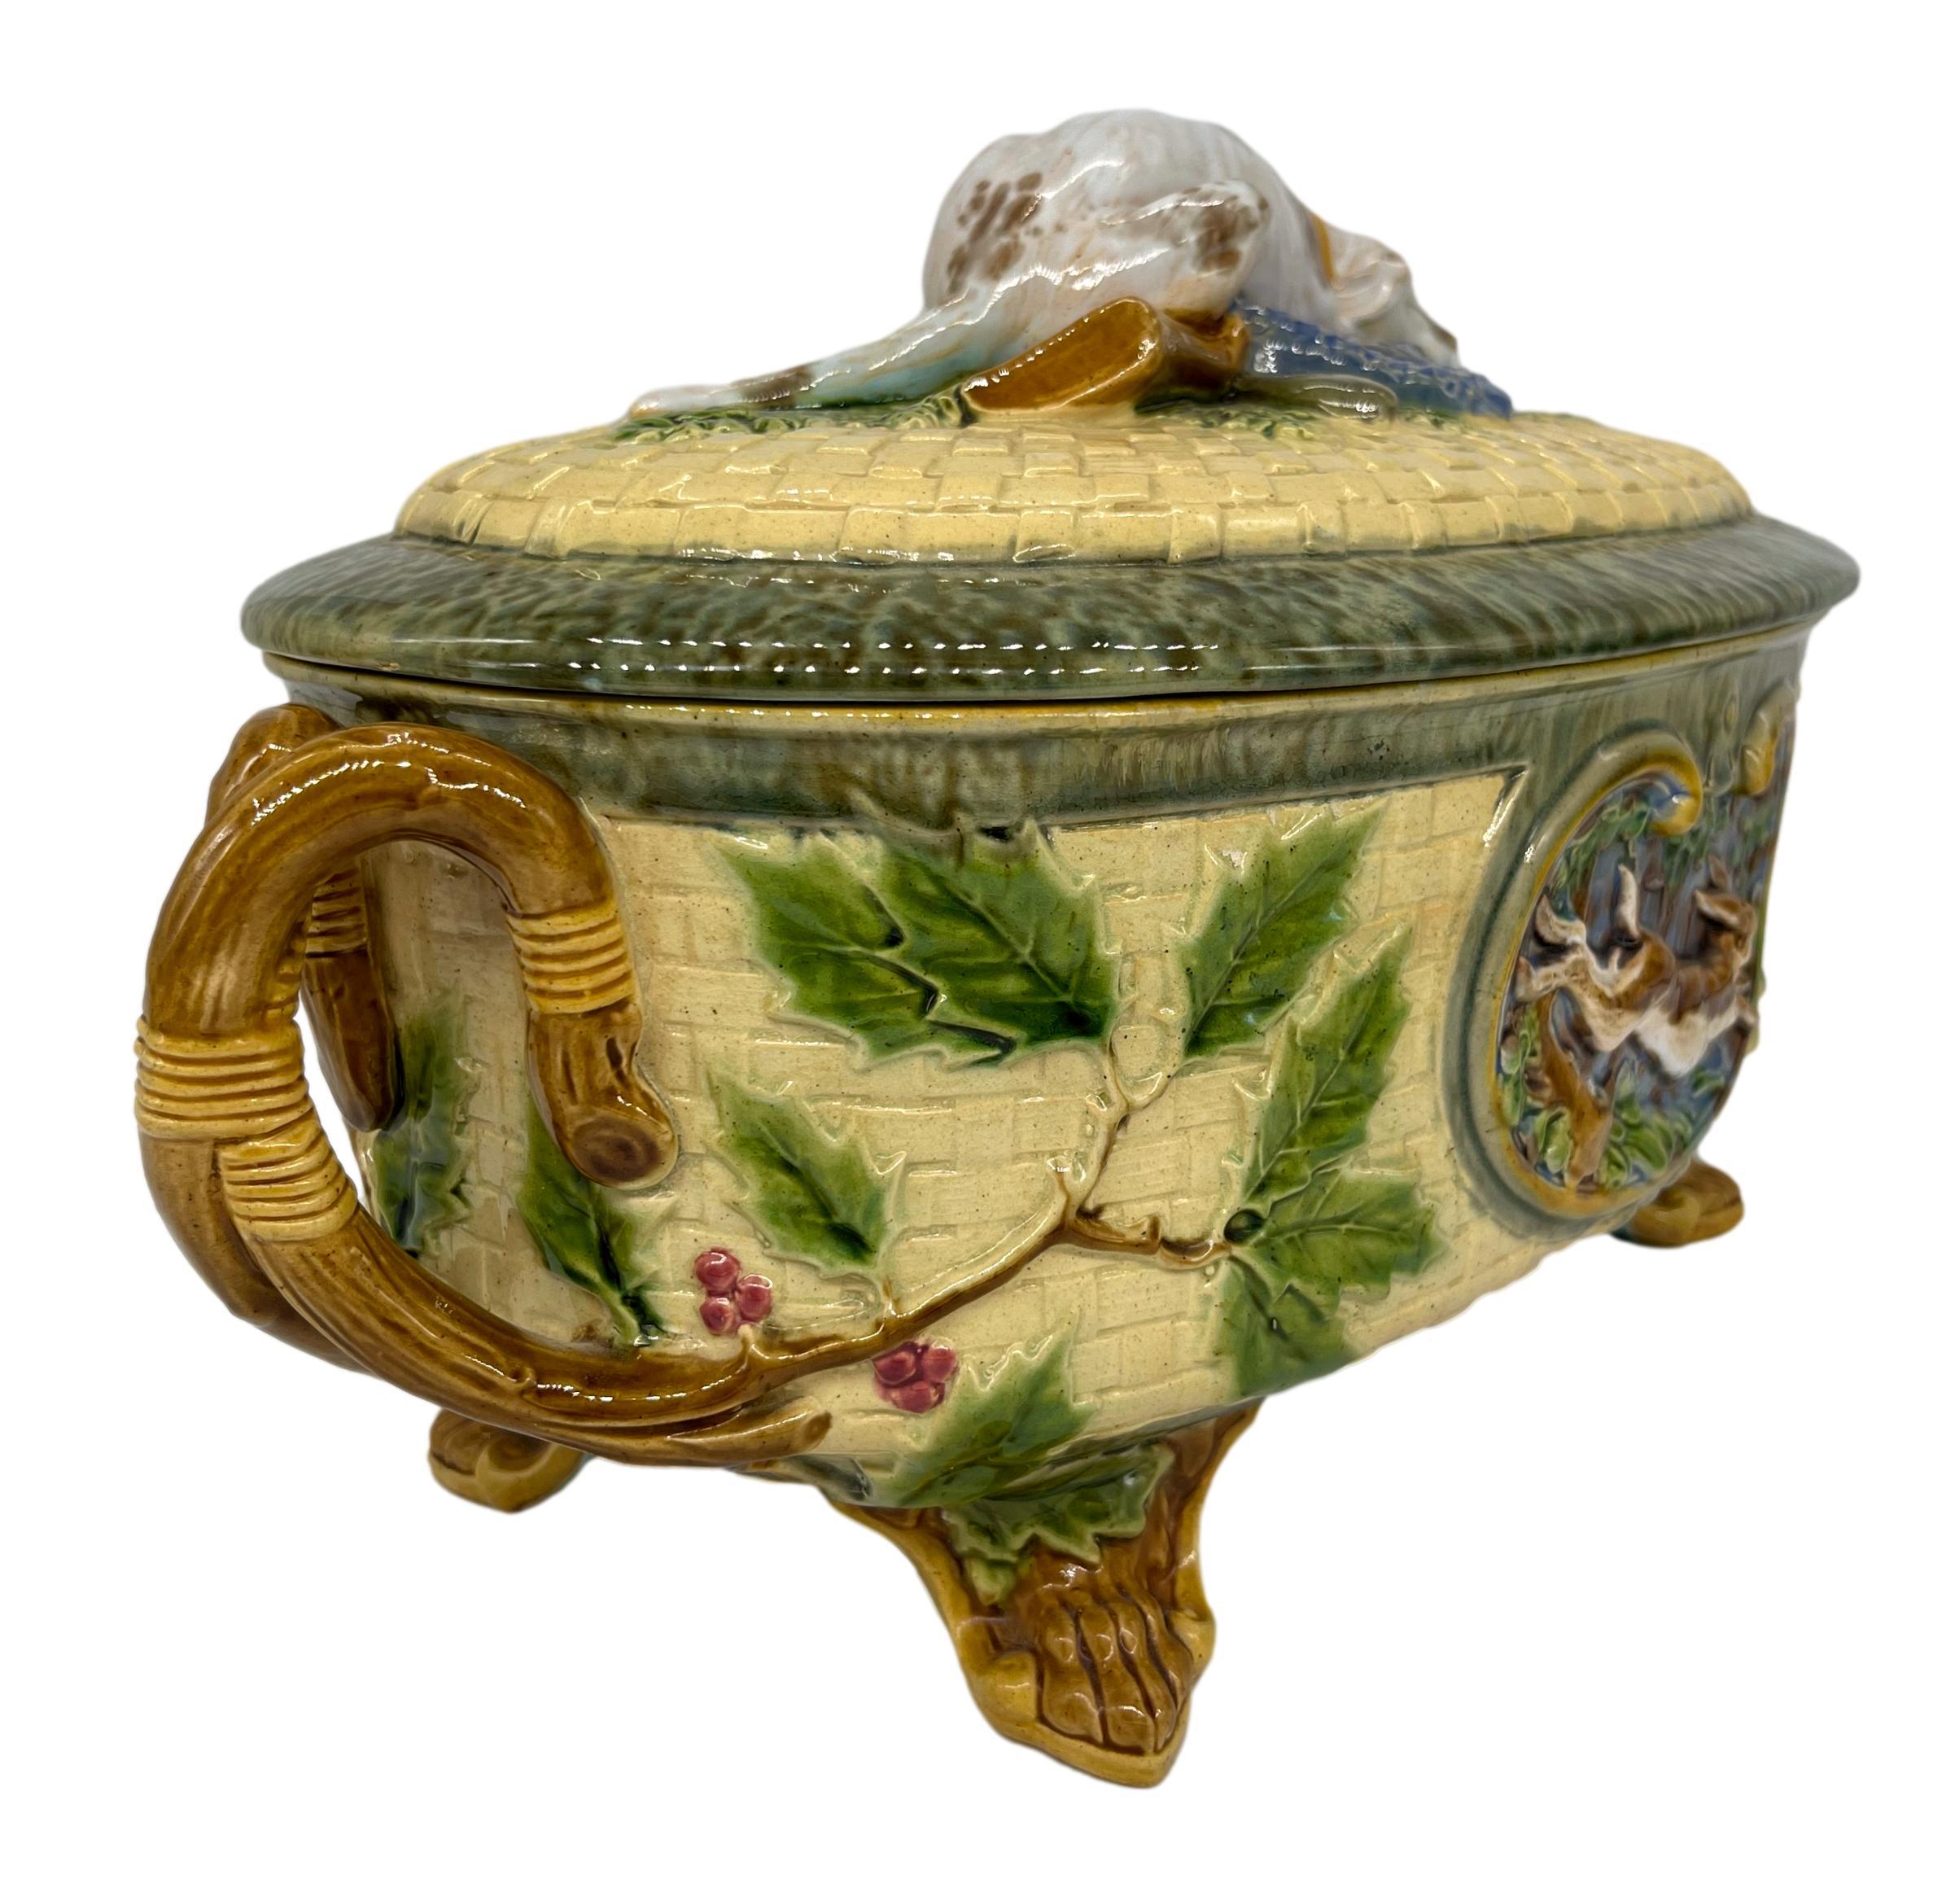 Victorian Minton Majolica Game Tureen with Hunting Dog Finial, Dated 1872